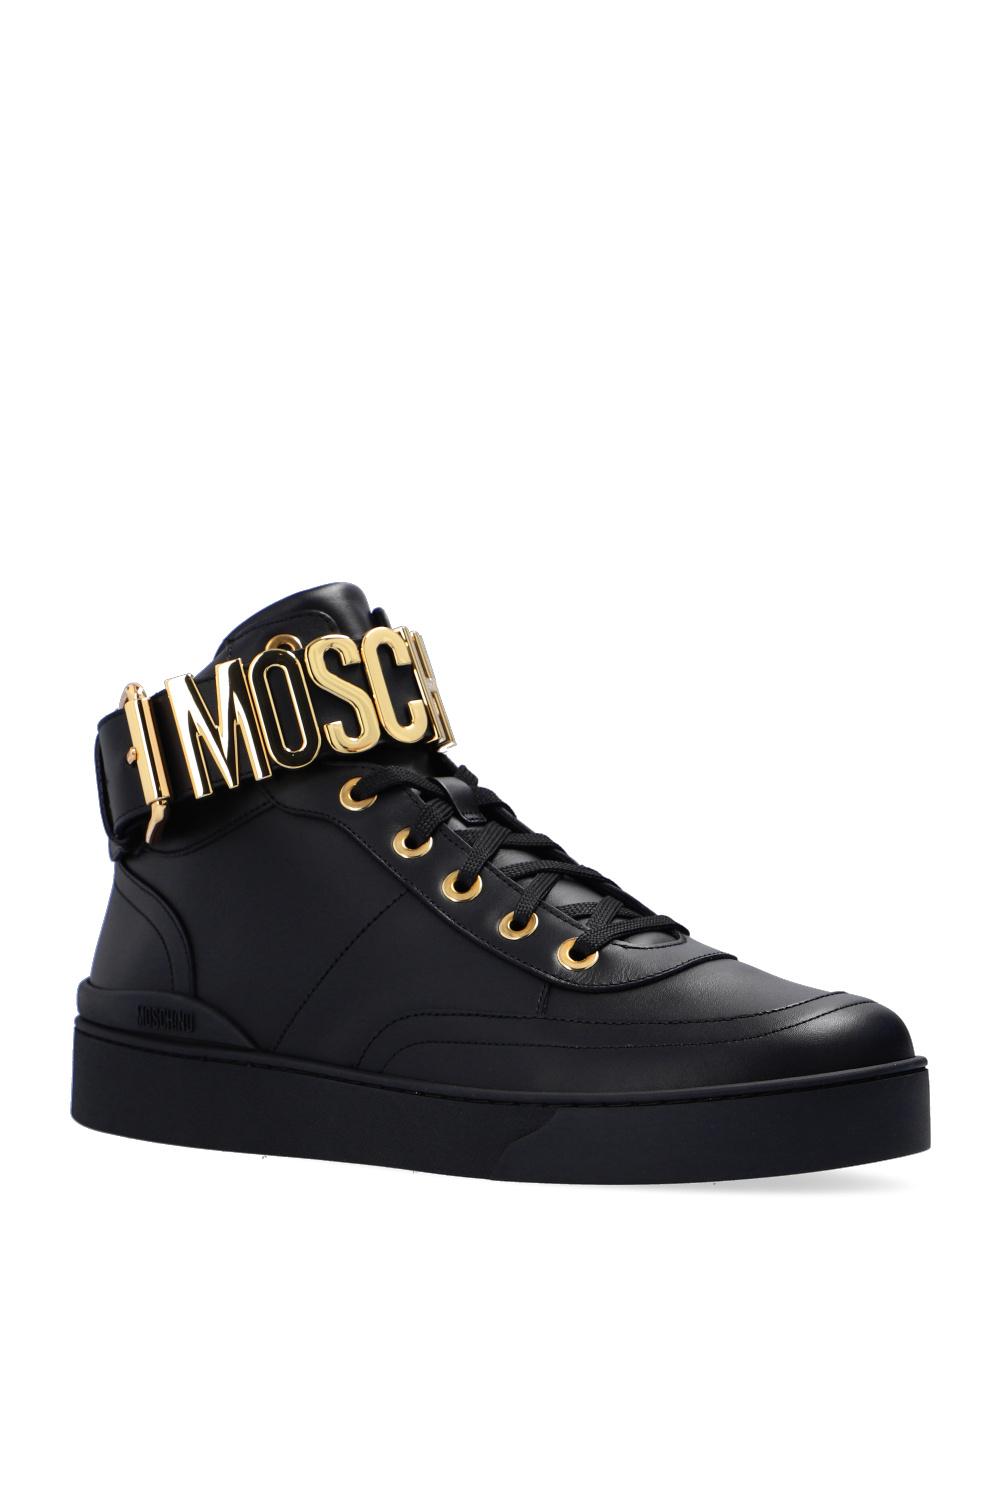 Moschino High-top Sneakers in Black for Men | Lyst